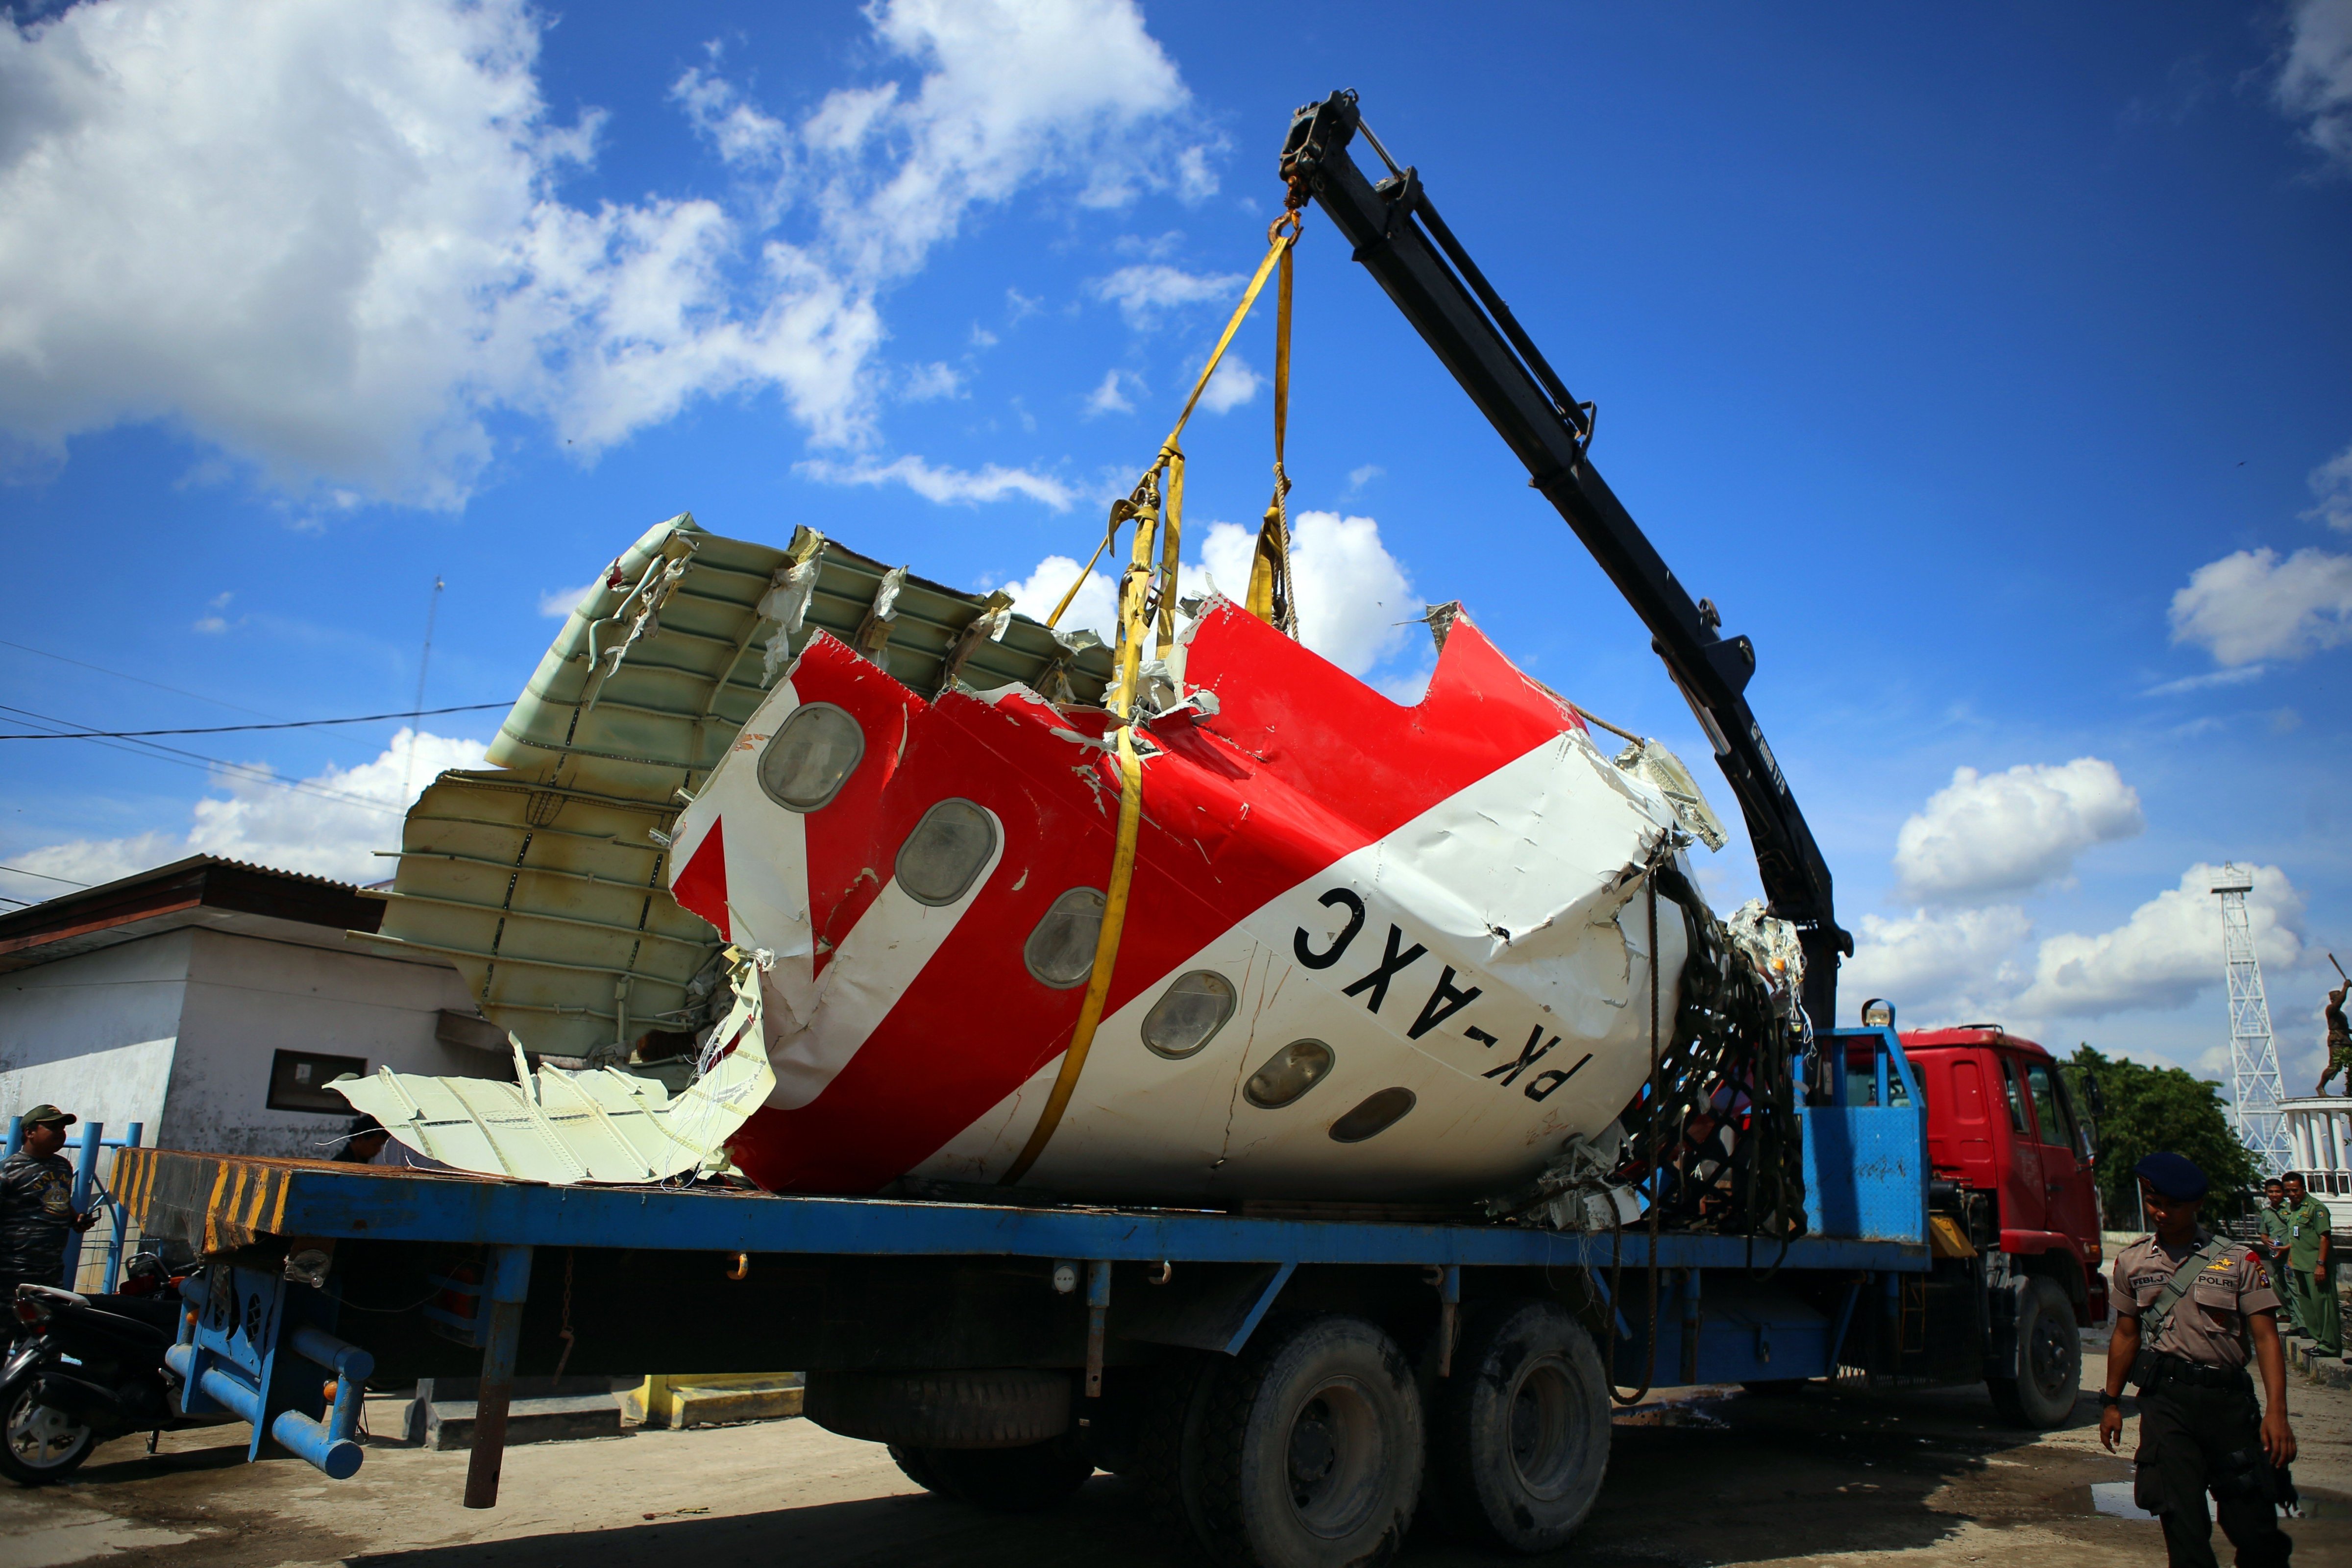 AirAsia aircraft tail is recovered from the Java Sea on Jan. 12, 2015, in Pangkalan Bun, Indonesia (Denny Pohan—Demotix/Corbis)